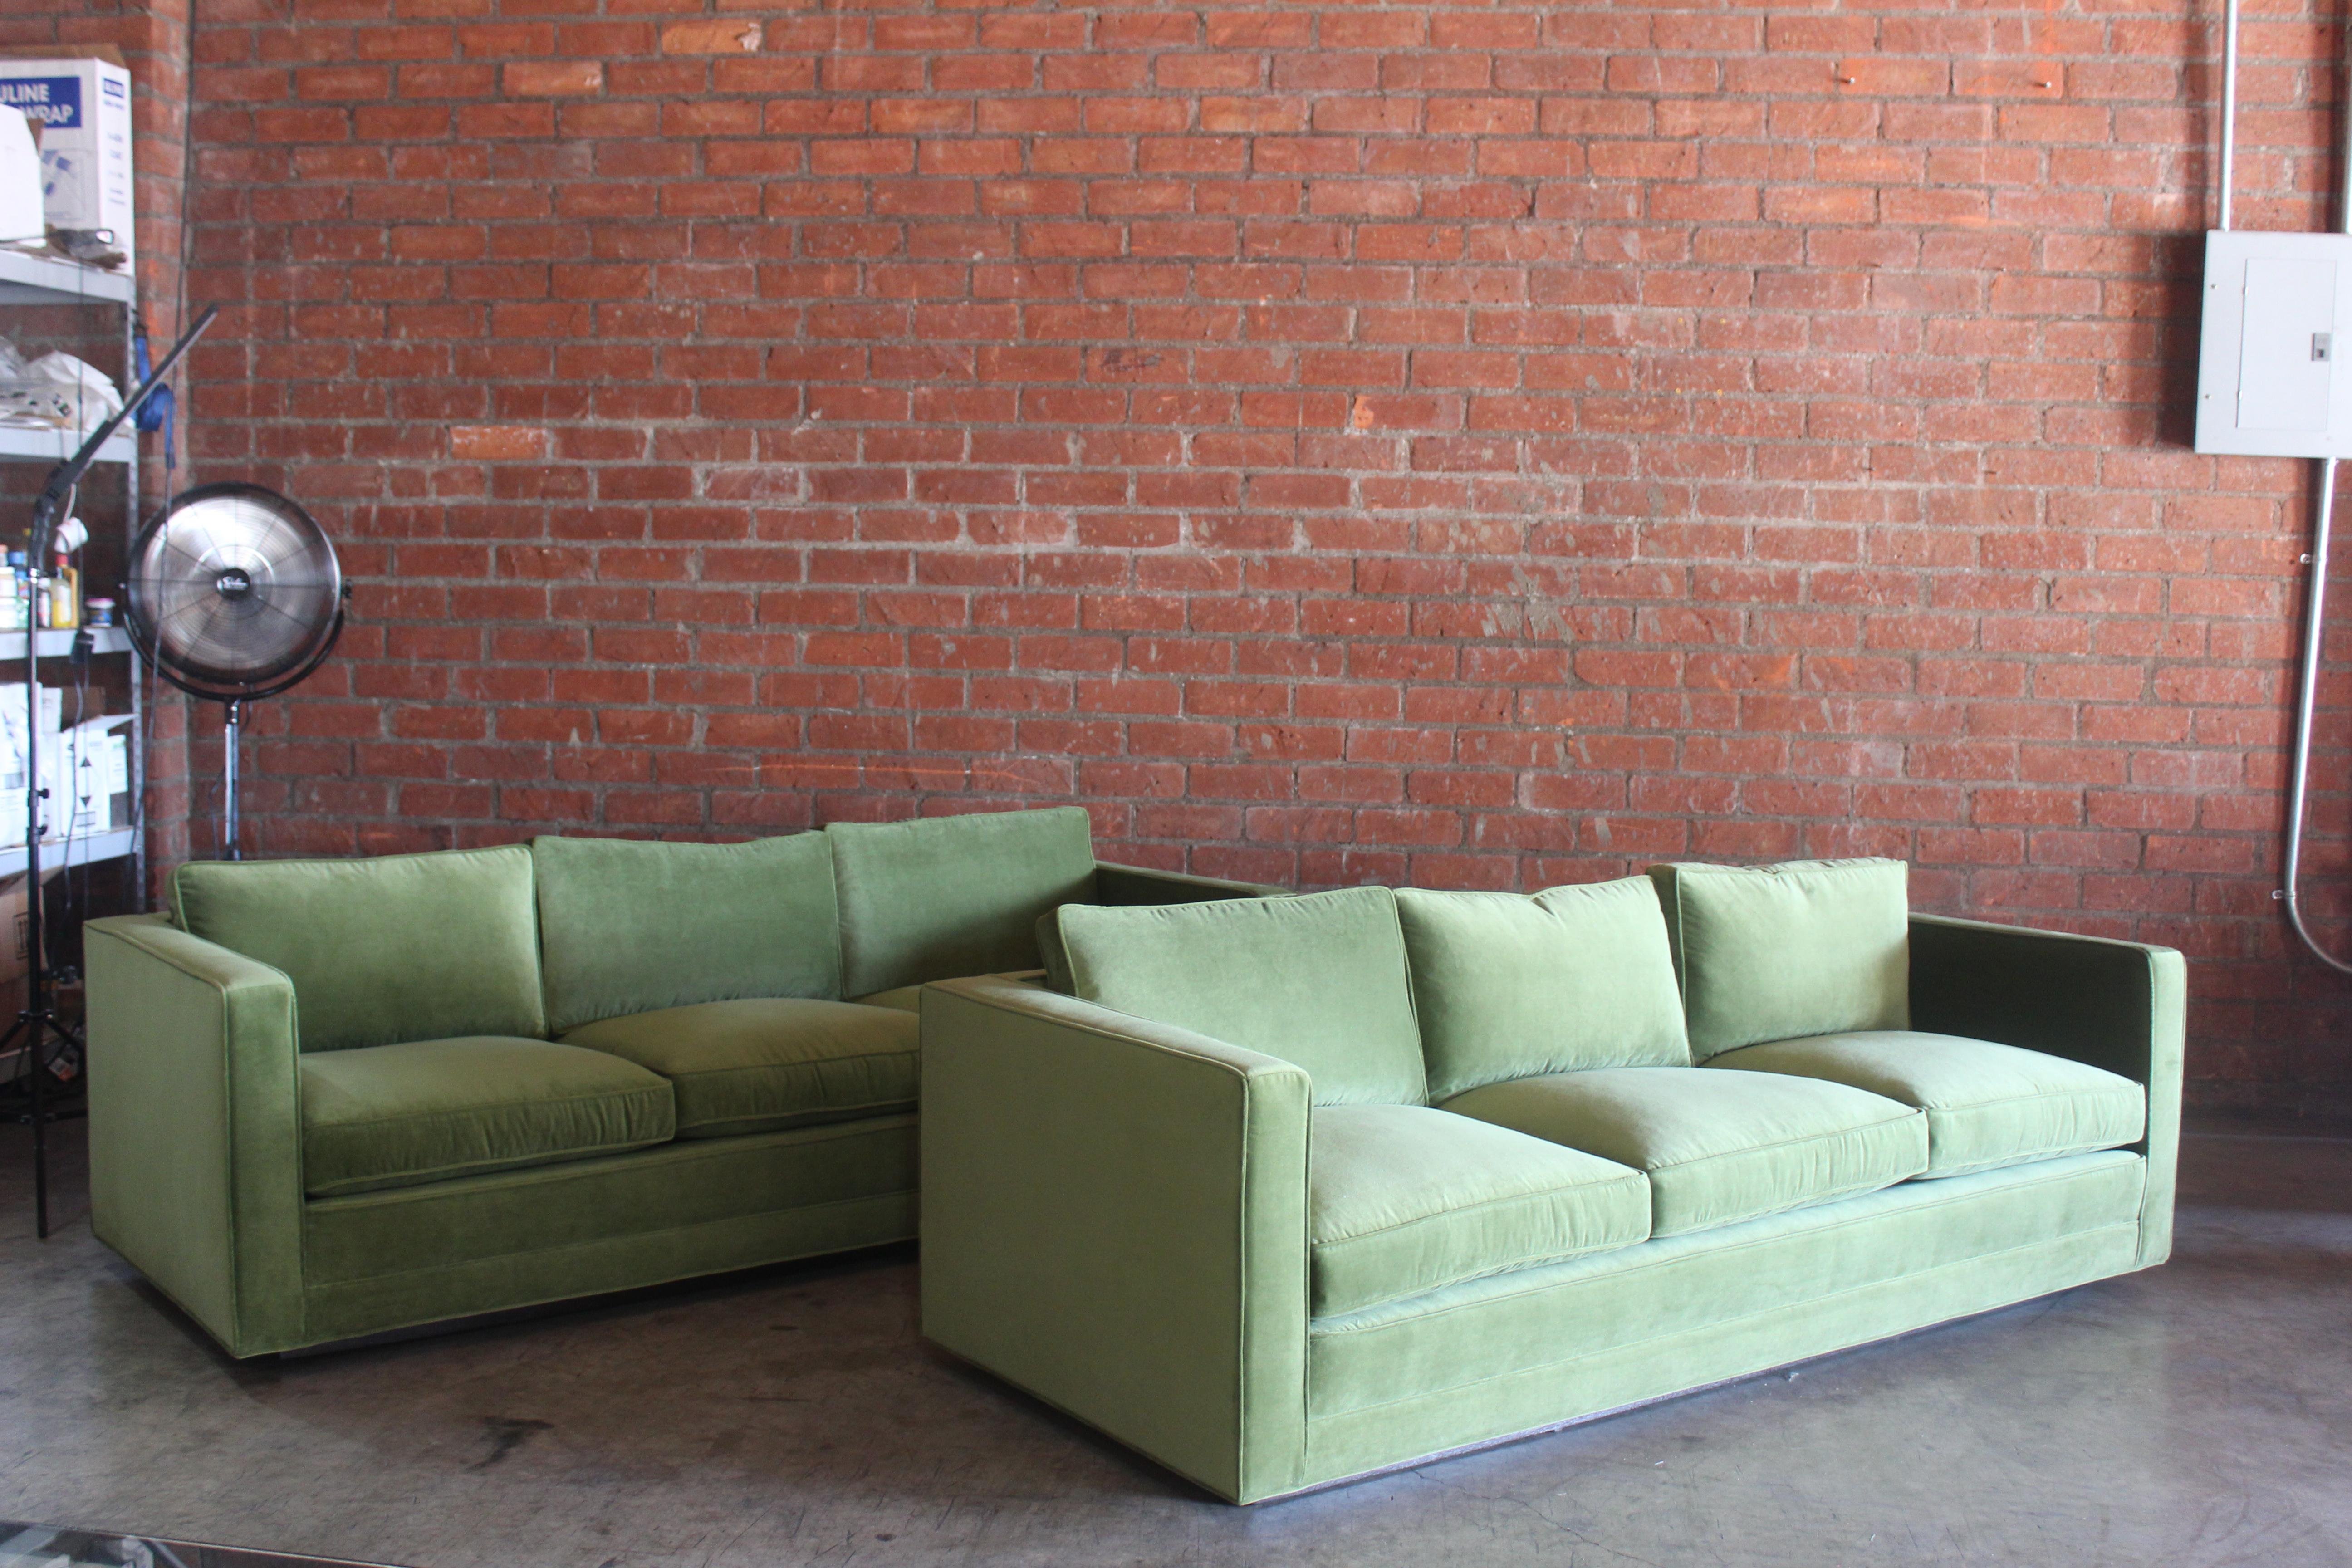 Pair of matching tuxedo sofas designed by Edward Wormley for Dunbar, U.S.A, 1950s. Each sofa has been restored with new avocado green cotton velvet. The original Dunbar fabric has been saved and appears under the seat cushions. These sofas sit on